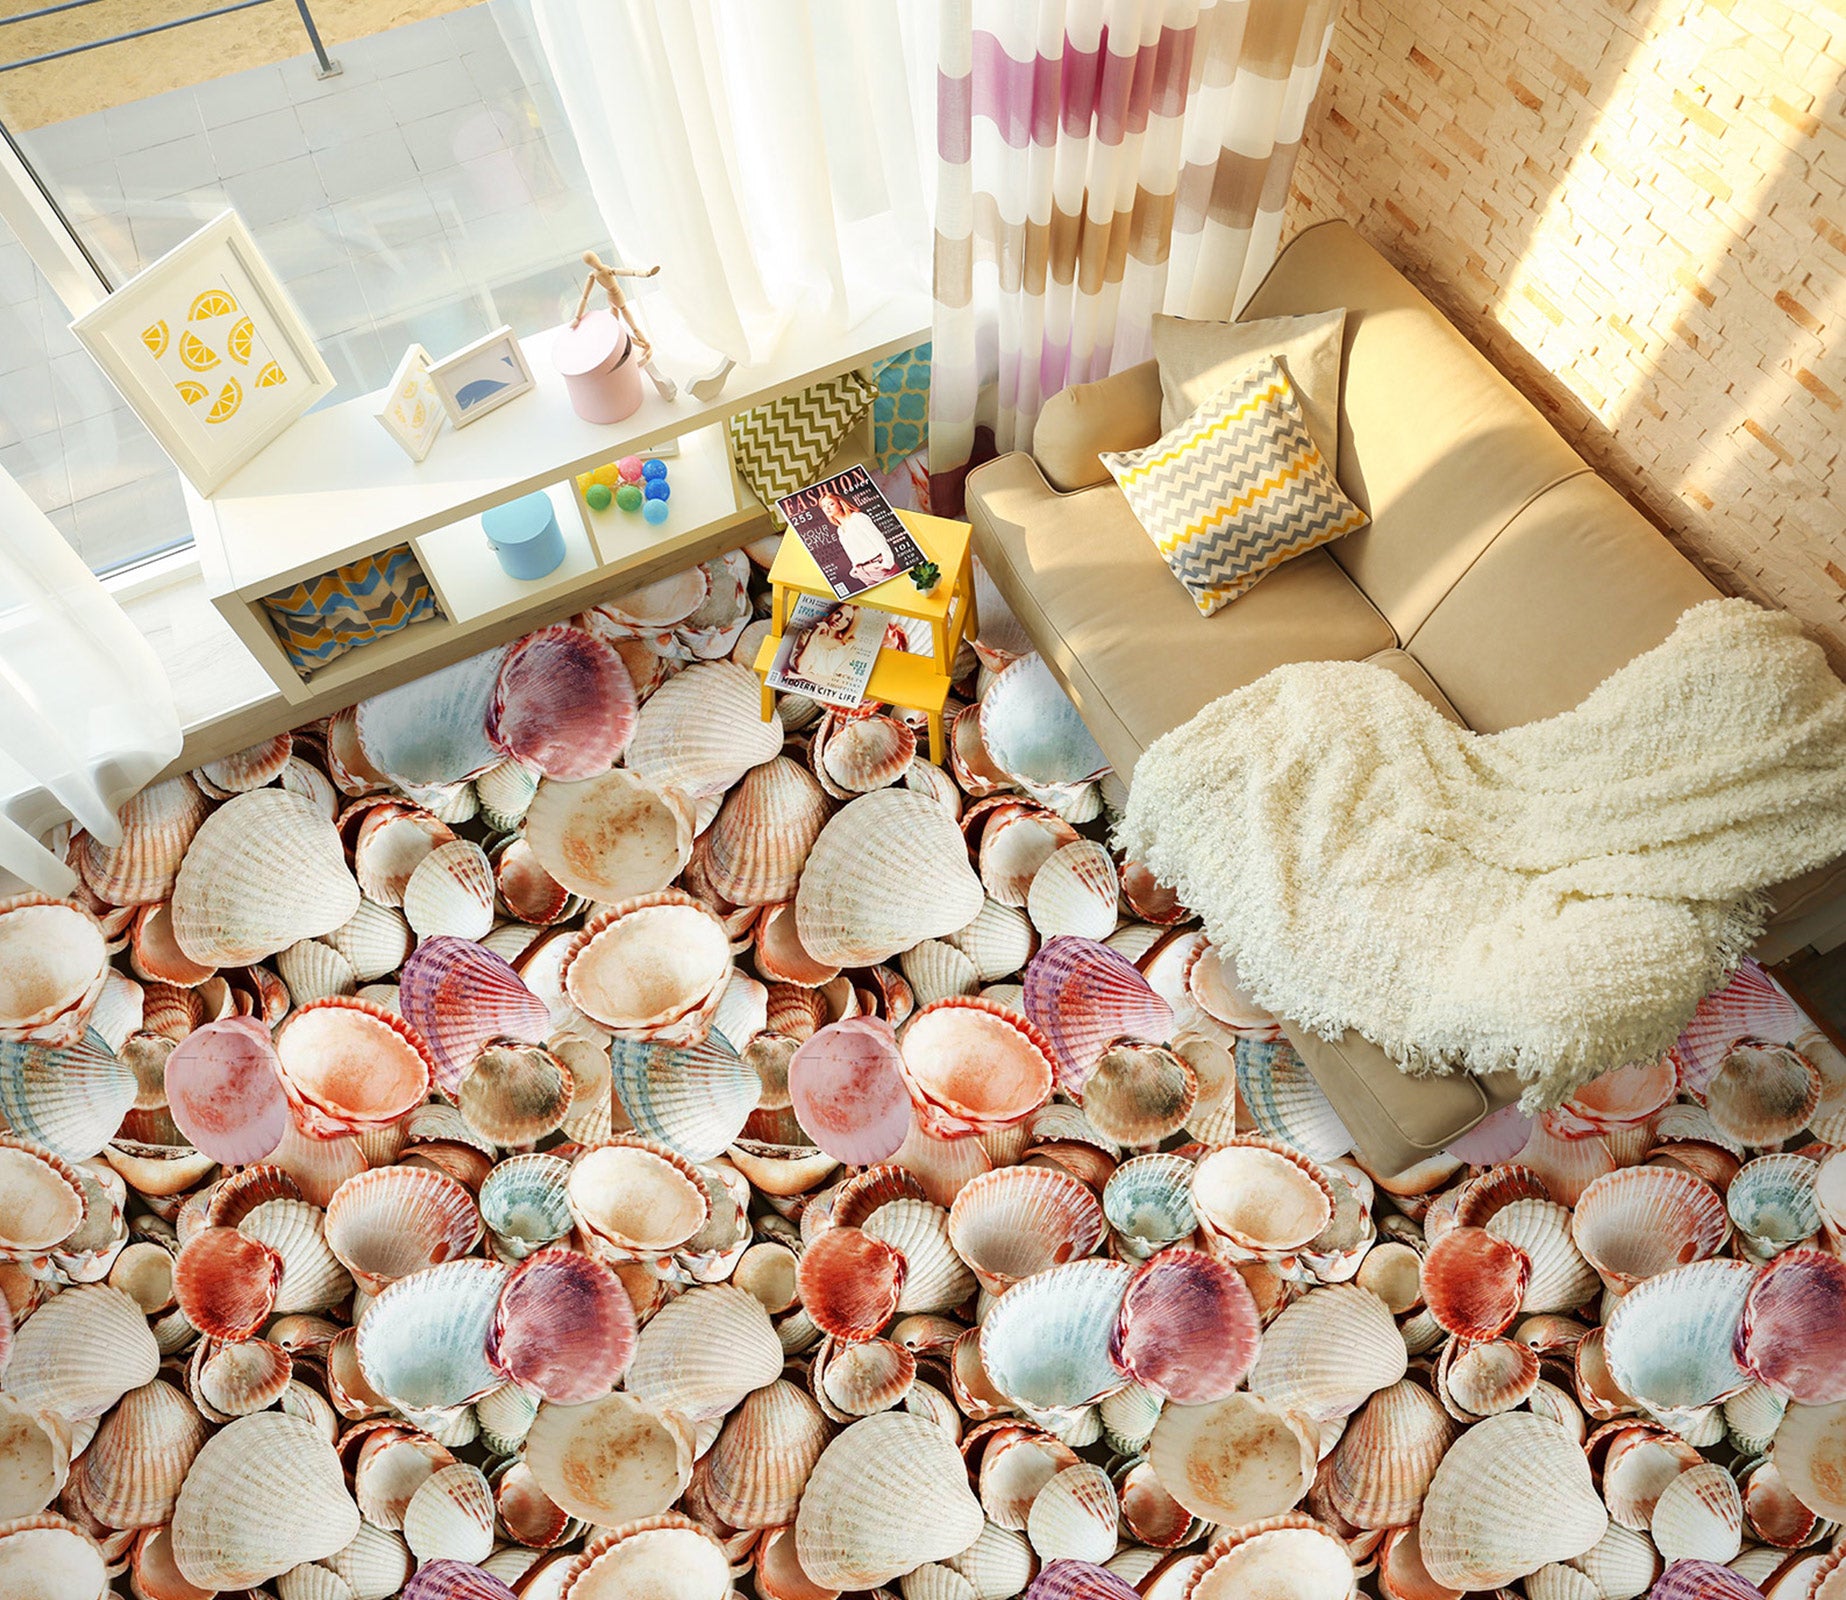 3D Rich Colorful Shells 1070 Floor Mural  Wallpaper Murals Self-Adhesive Removable Print Epoxy